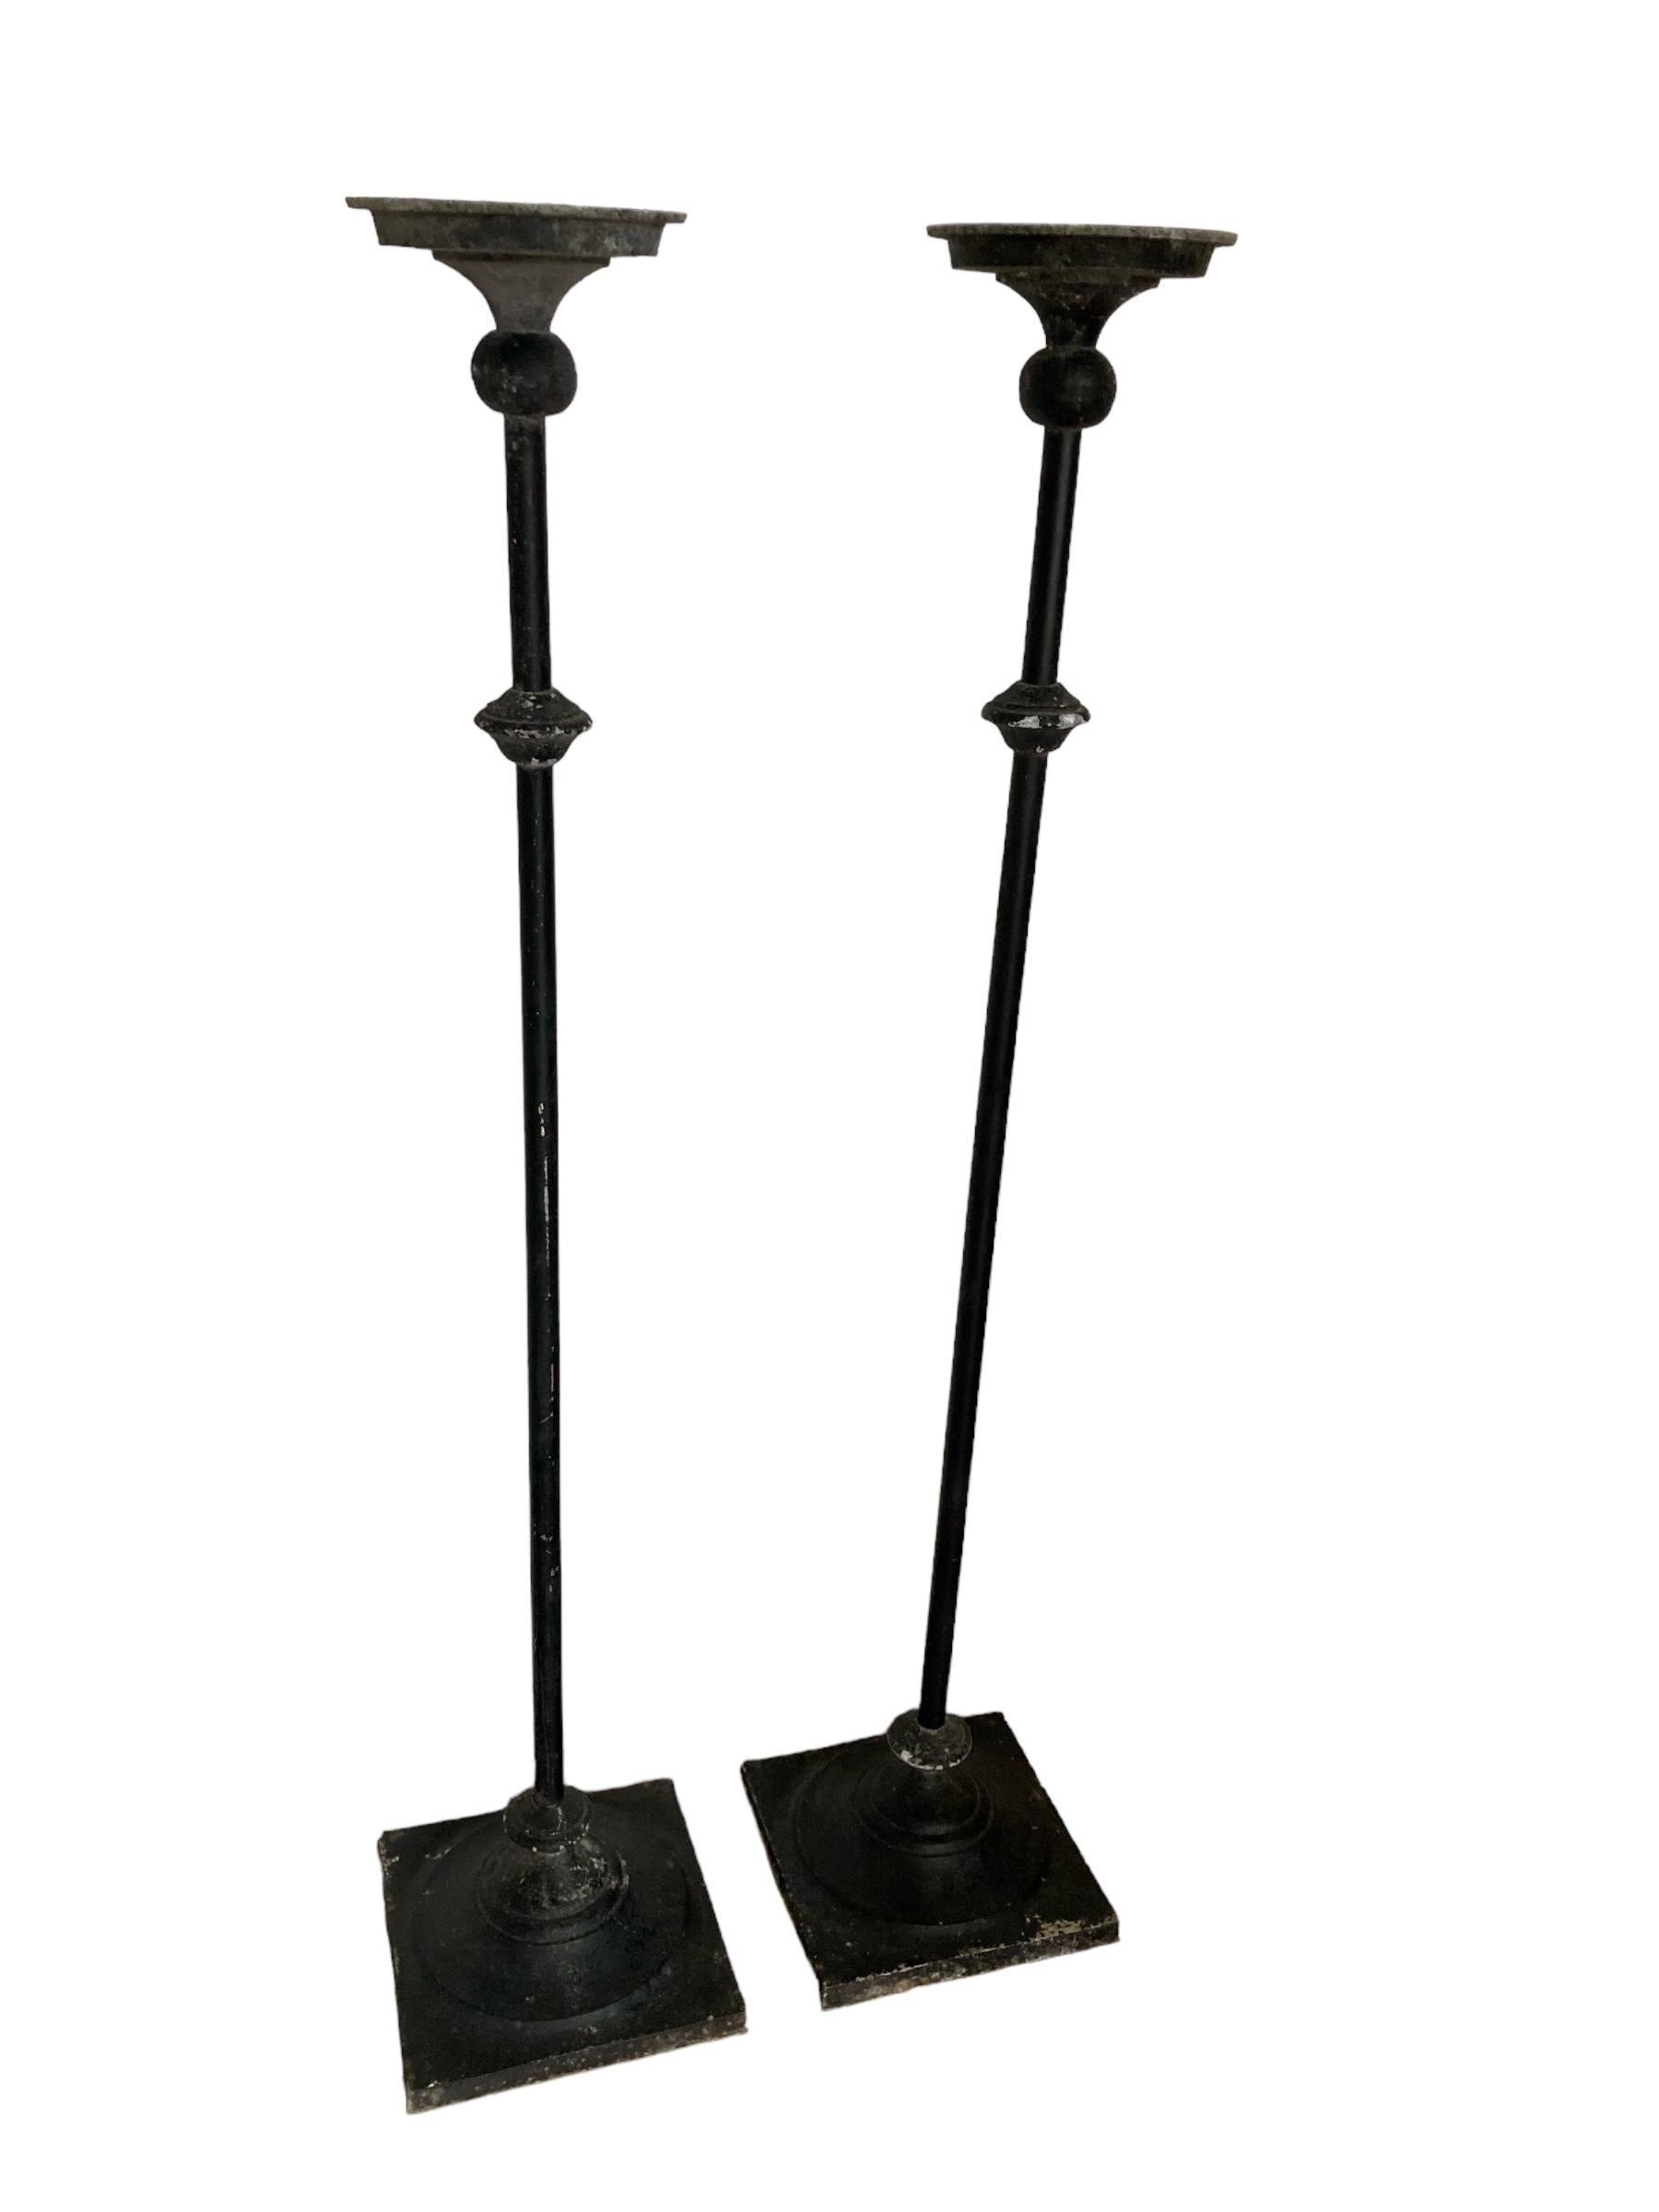 A Pair of Tall Wrought Iron Church Floor Candle Holders Gothic Style For Sale 4